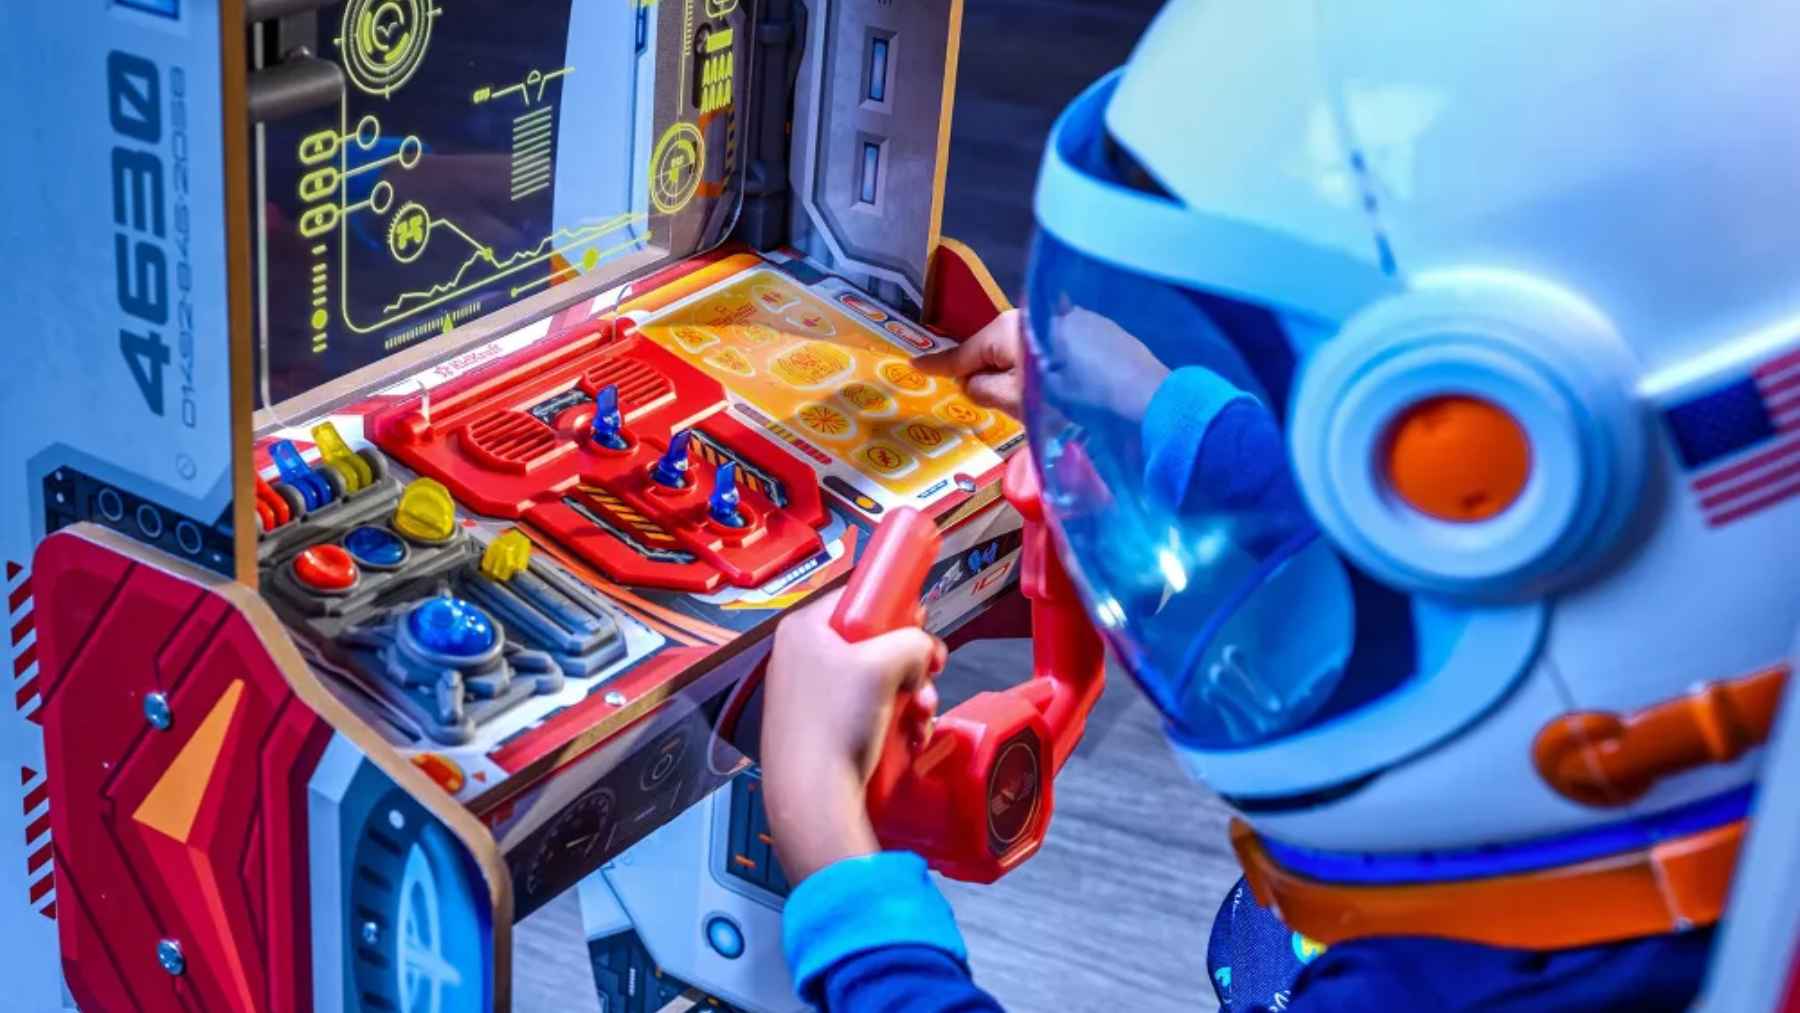 This space simulator with projector from Target is the top toy every child  wants for Christmas